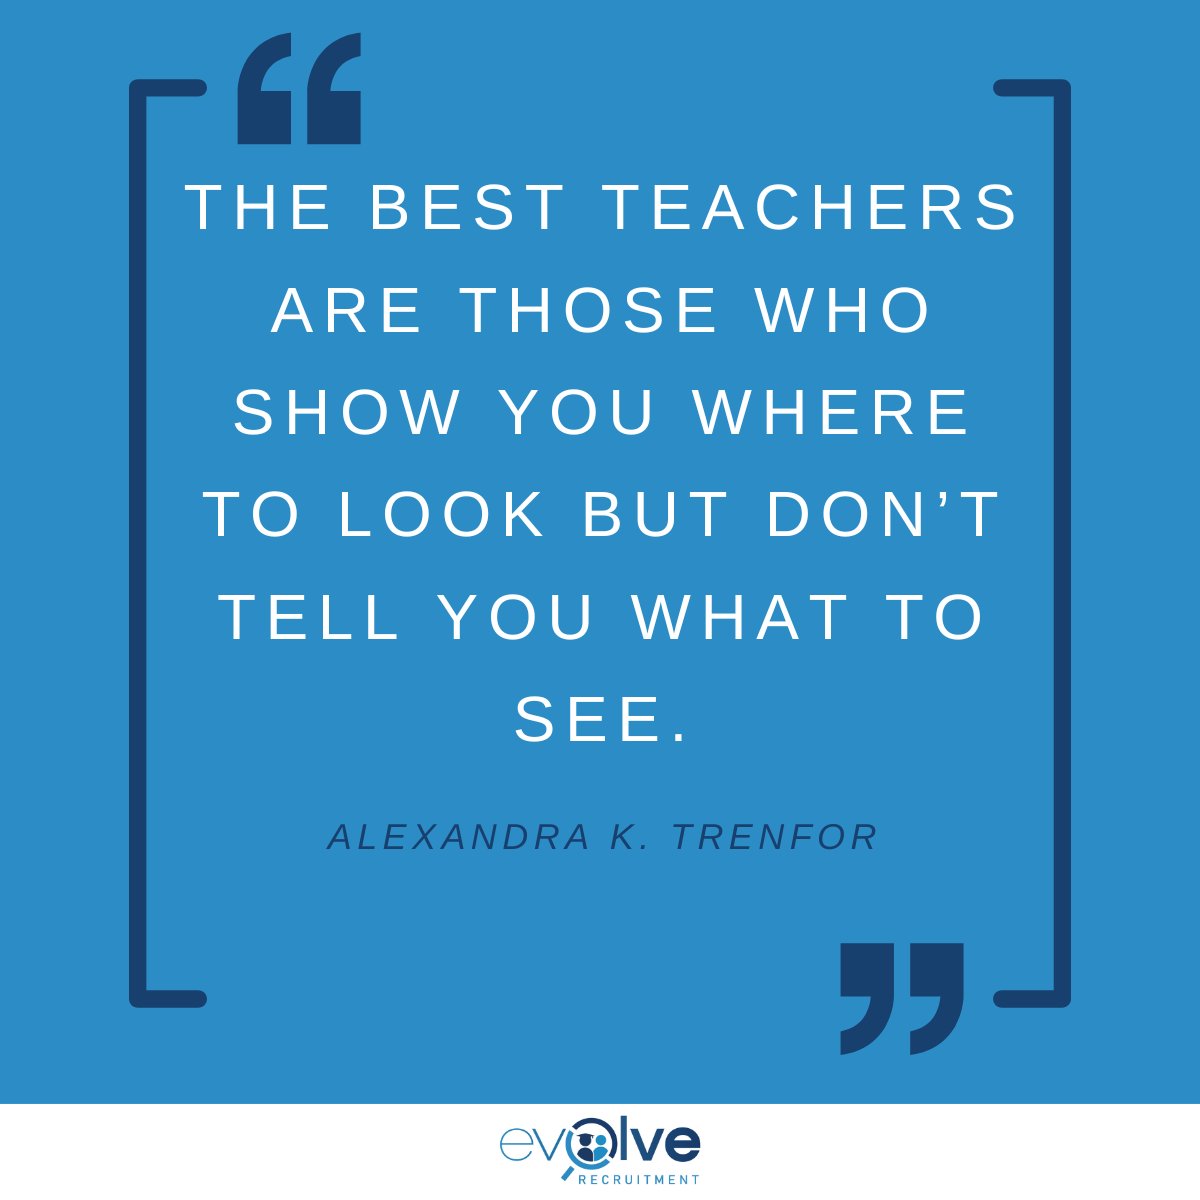 It's not about dictating answers; it's about illuminating pathways to discovery. The best teachers inspire curiosity, guide exploration, and nurture independent thinking. 

#EmpowerEducation #TeachingInspiration #QuoteOfTheDay #BestTeachers #EvolveRecruitment